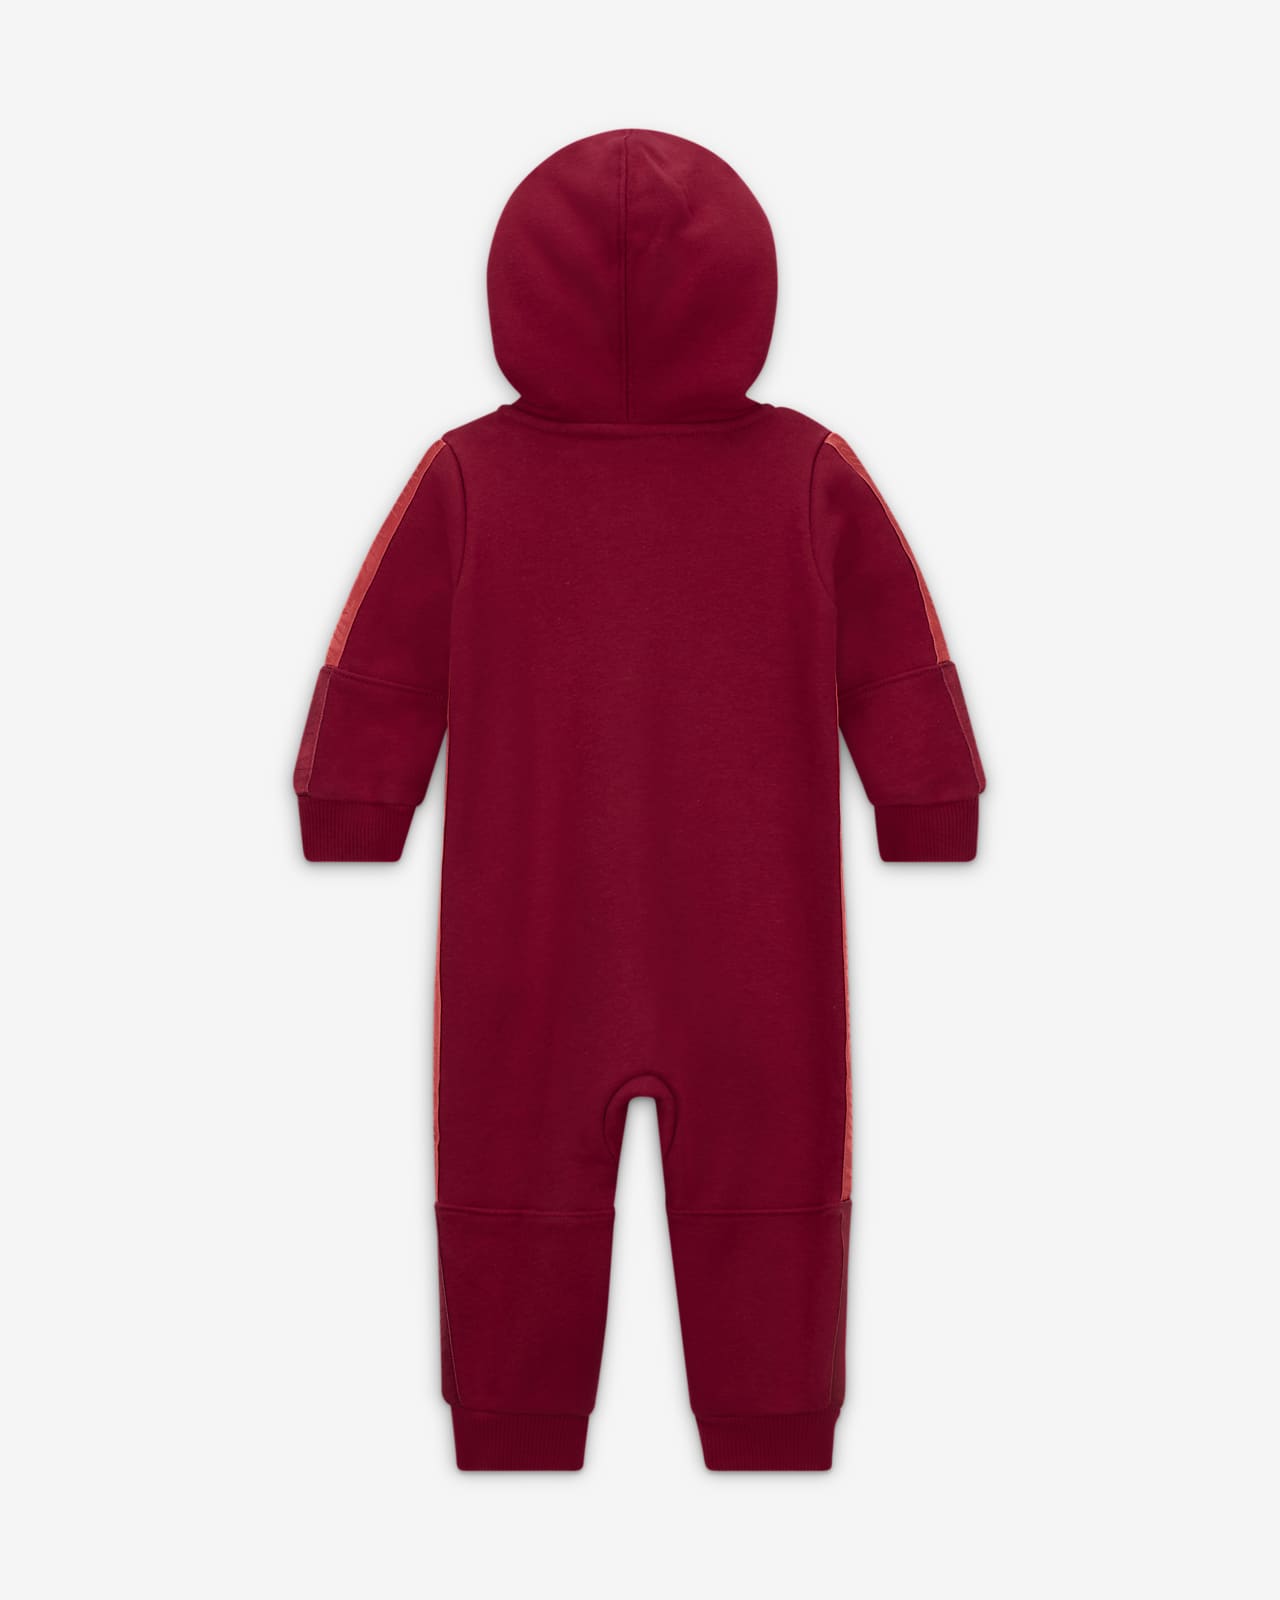 Nike Sportswear Taping Hooded Coverall Baby Coverall.